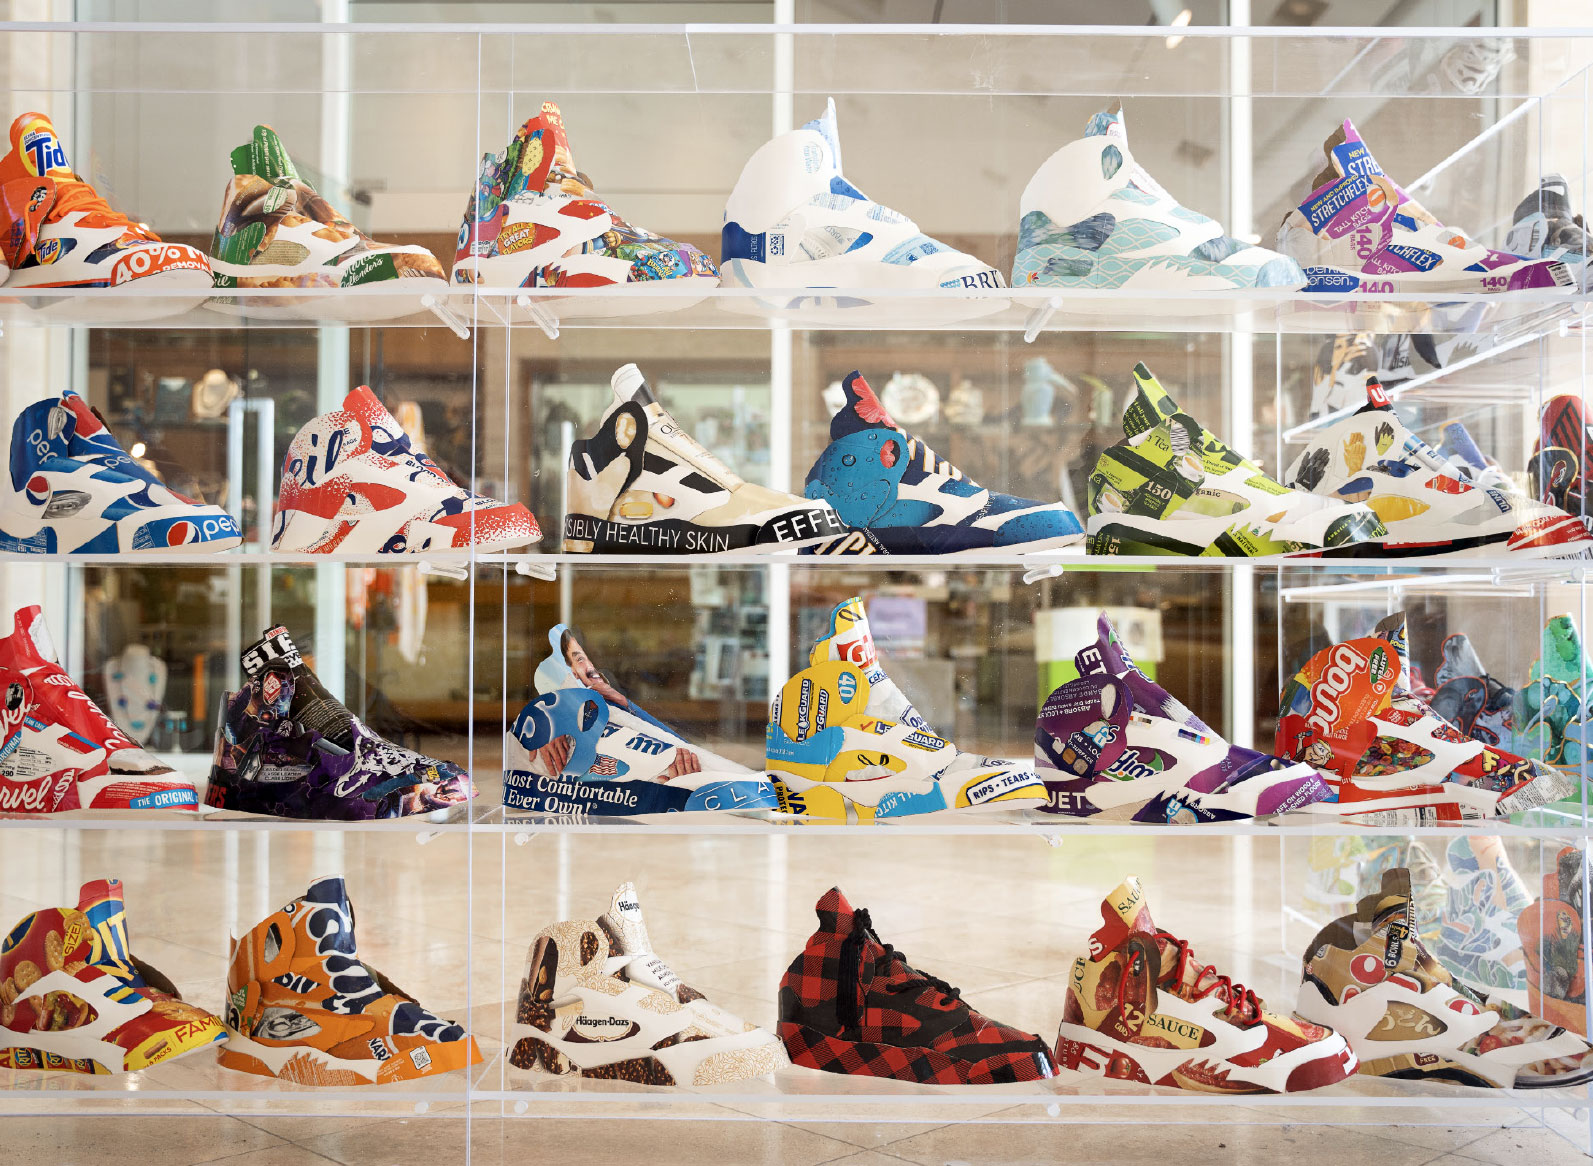 Andy Yoder Exhibition of Air Jordan shoes